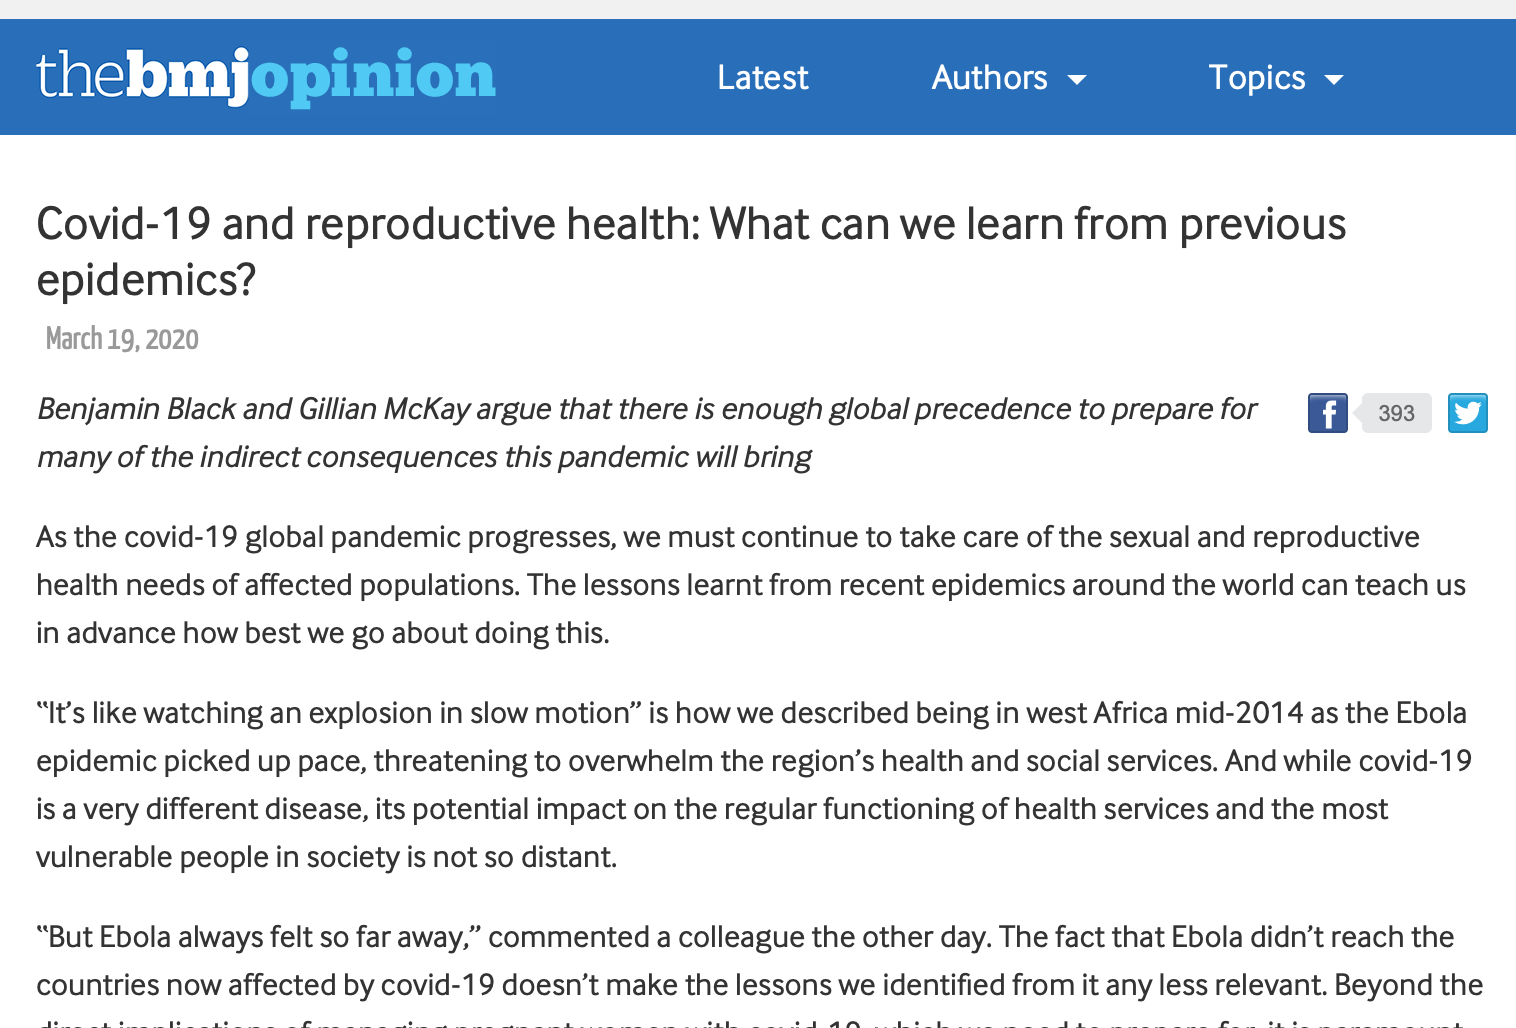 COVID-19 and reproductive health: What can we learn from previous epidemics?